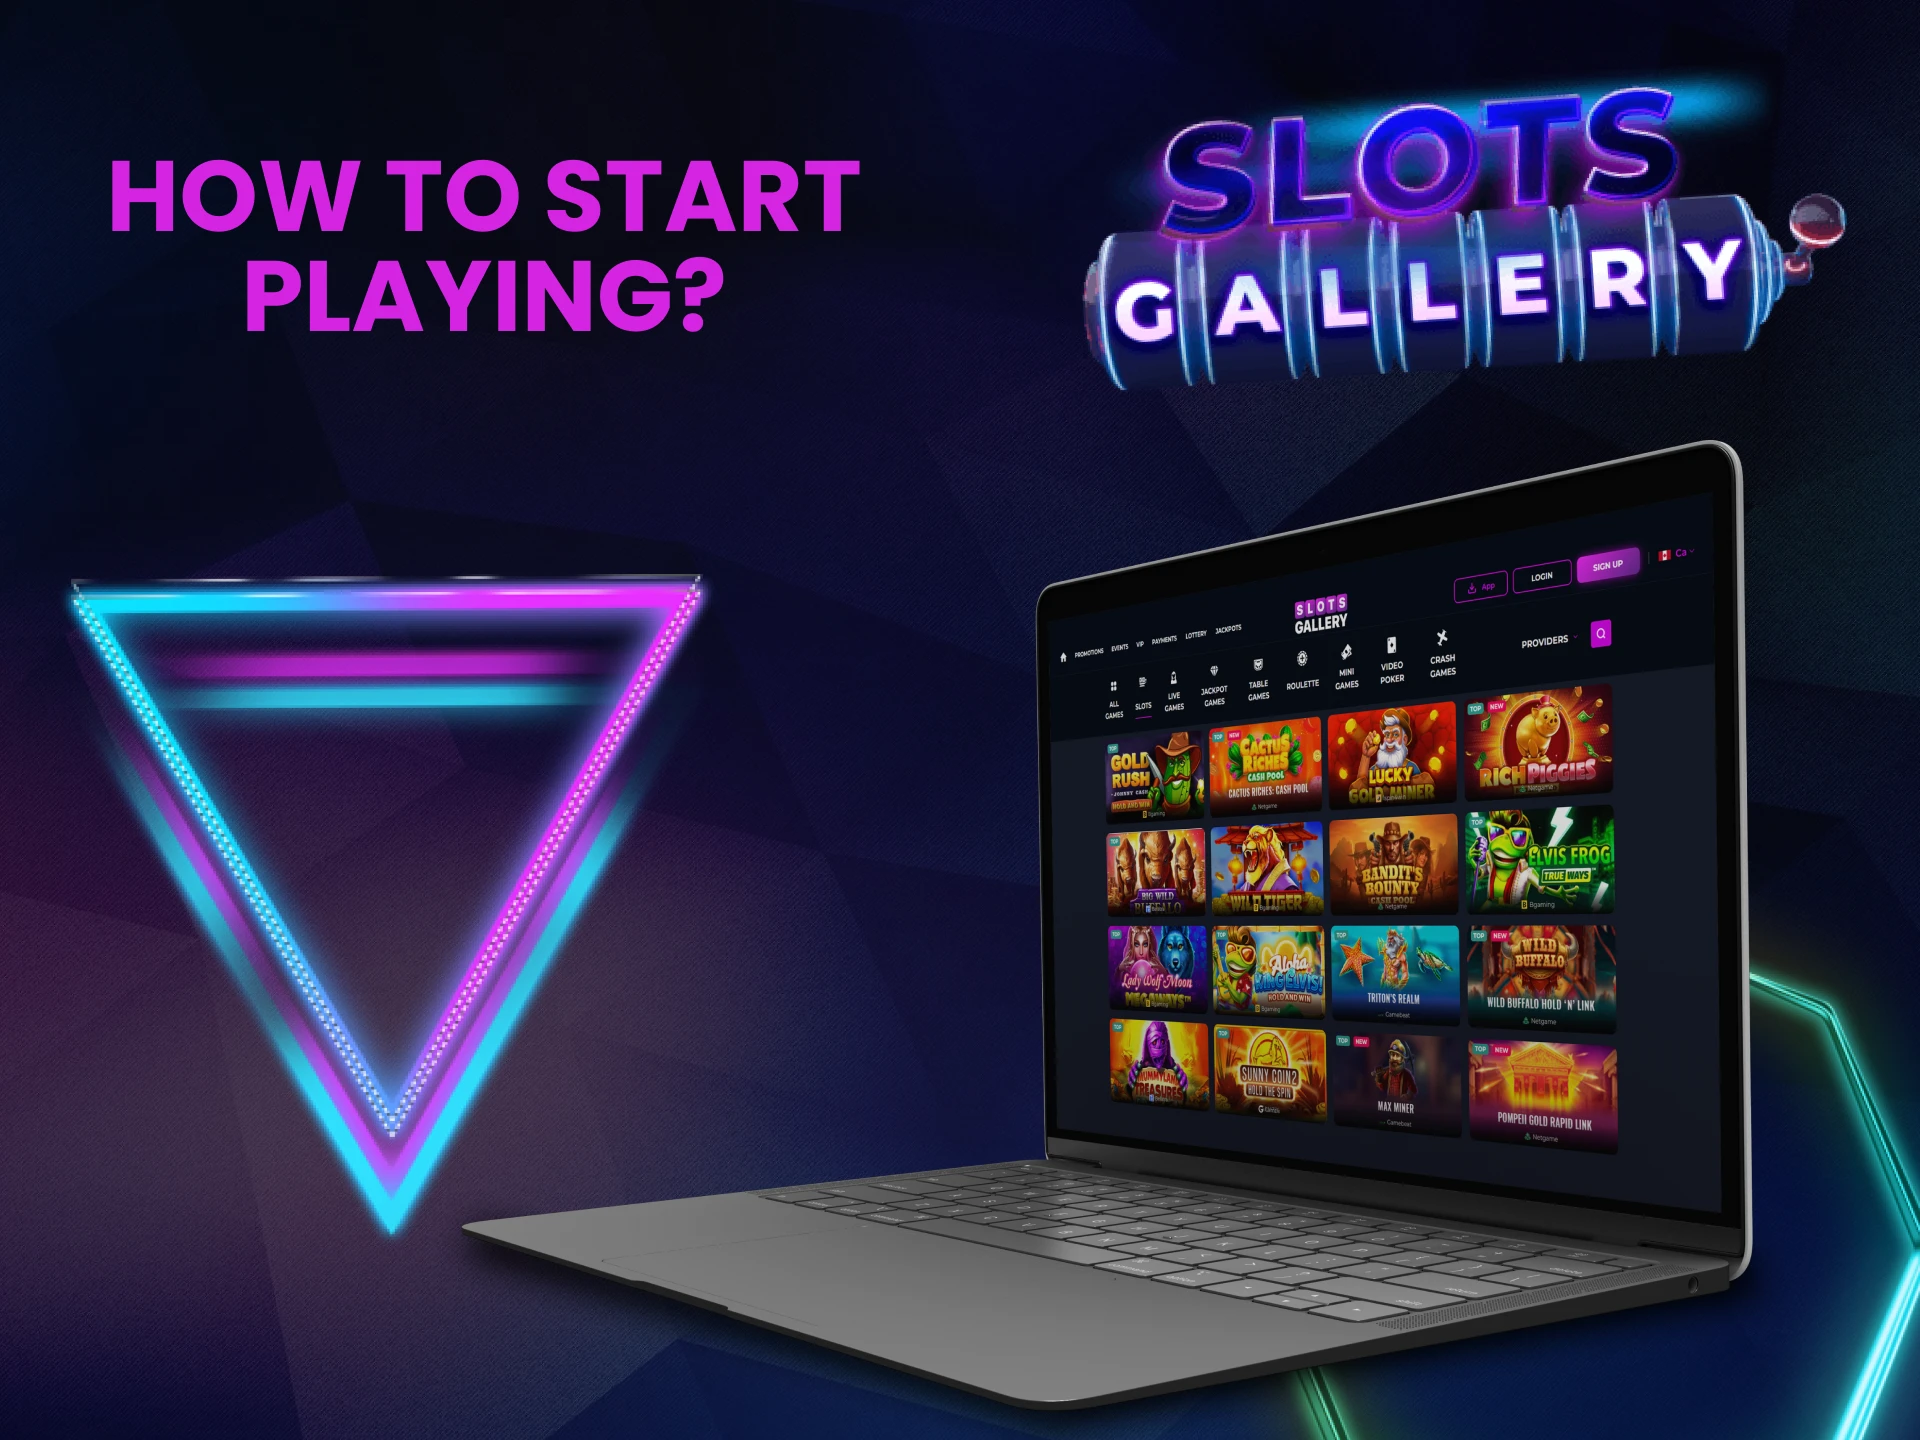 We will show you how to start playing slots on Slots Gallery.